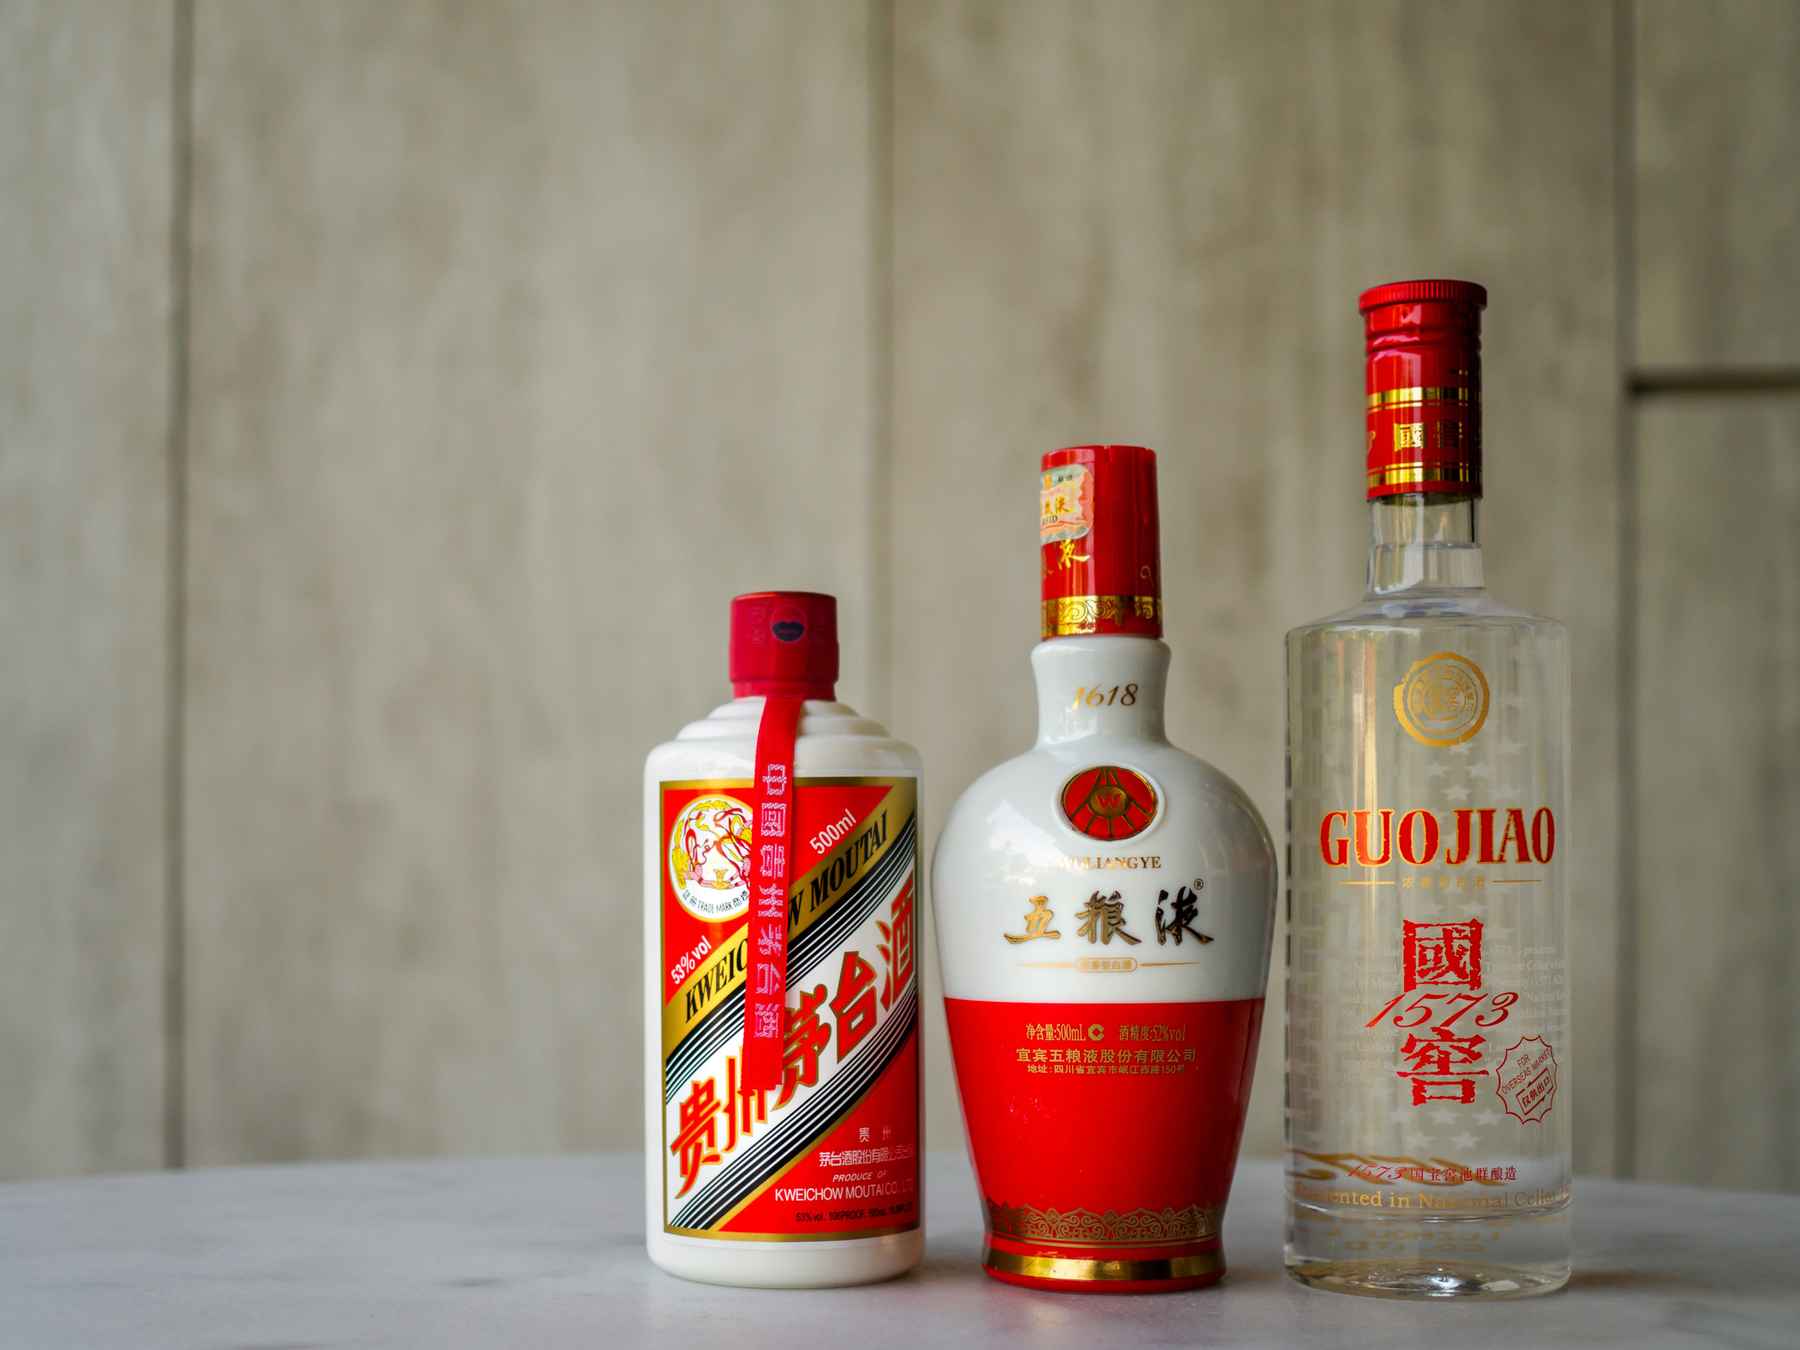 Three different red and white baijiu (Chinese liquor) bottles, arranged from shortest to tallest.